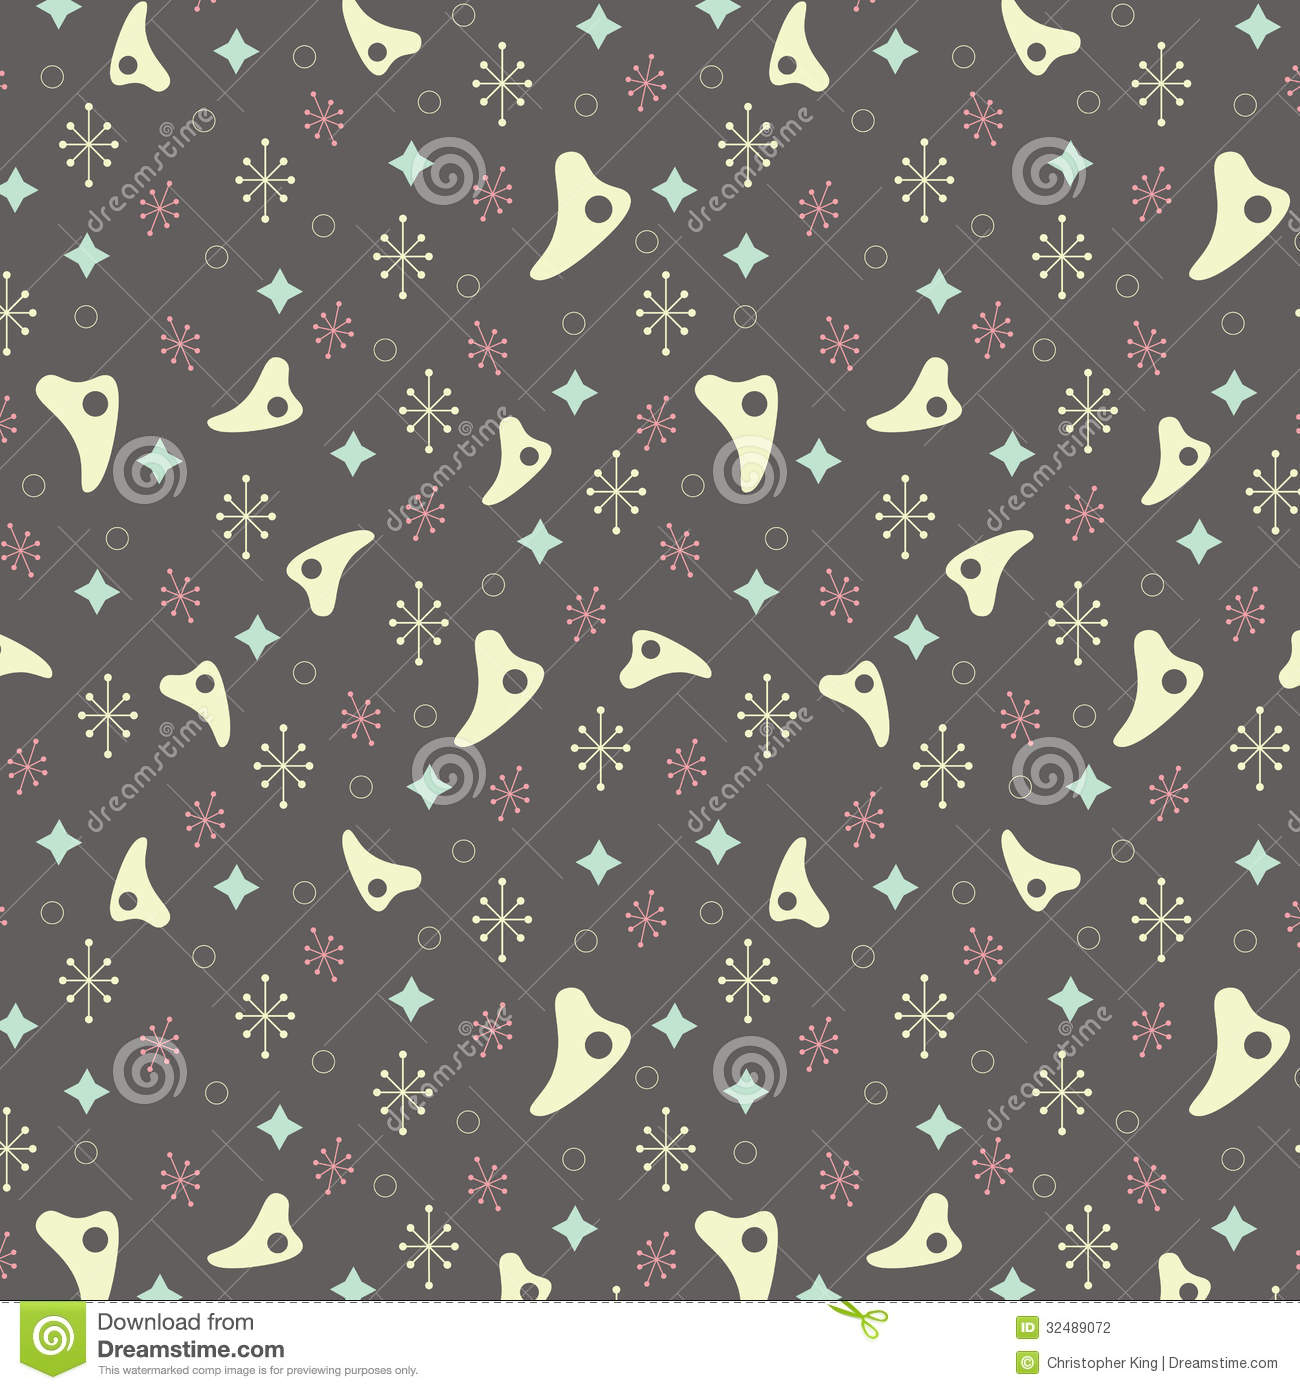 1950s Backgrounds 1950s retro style pattern